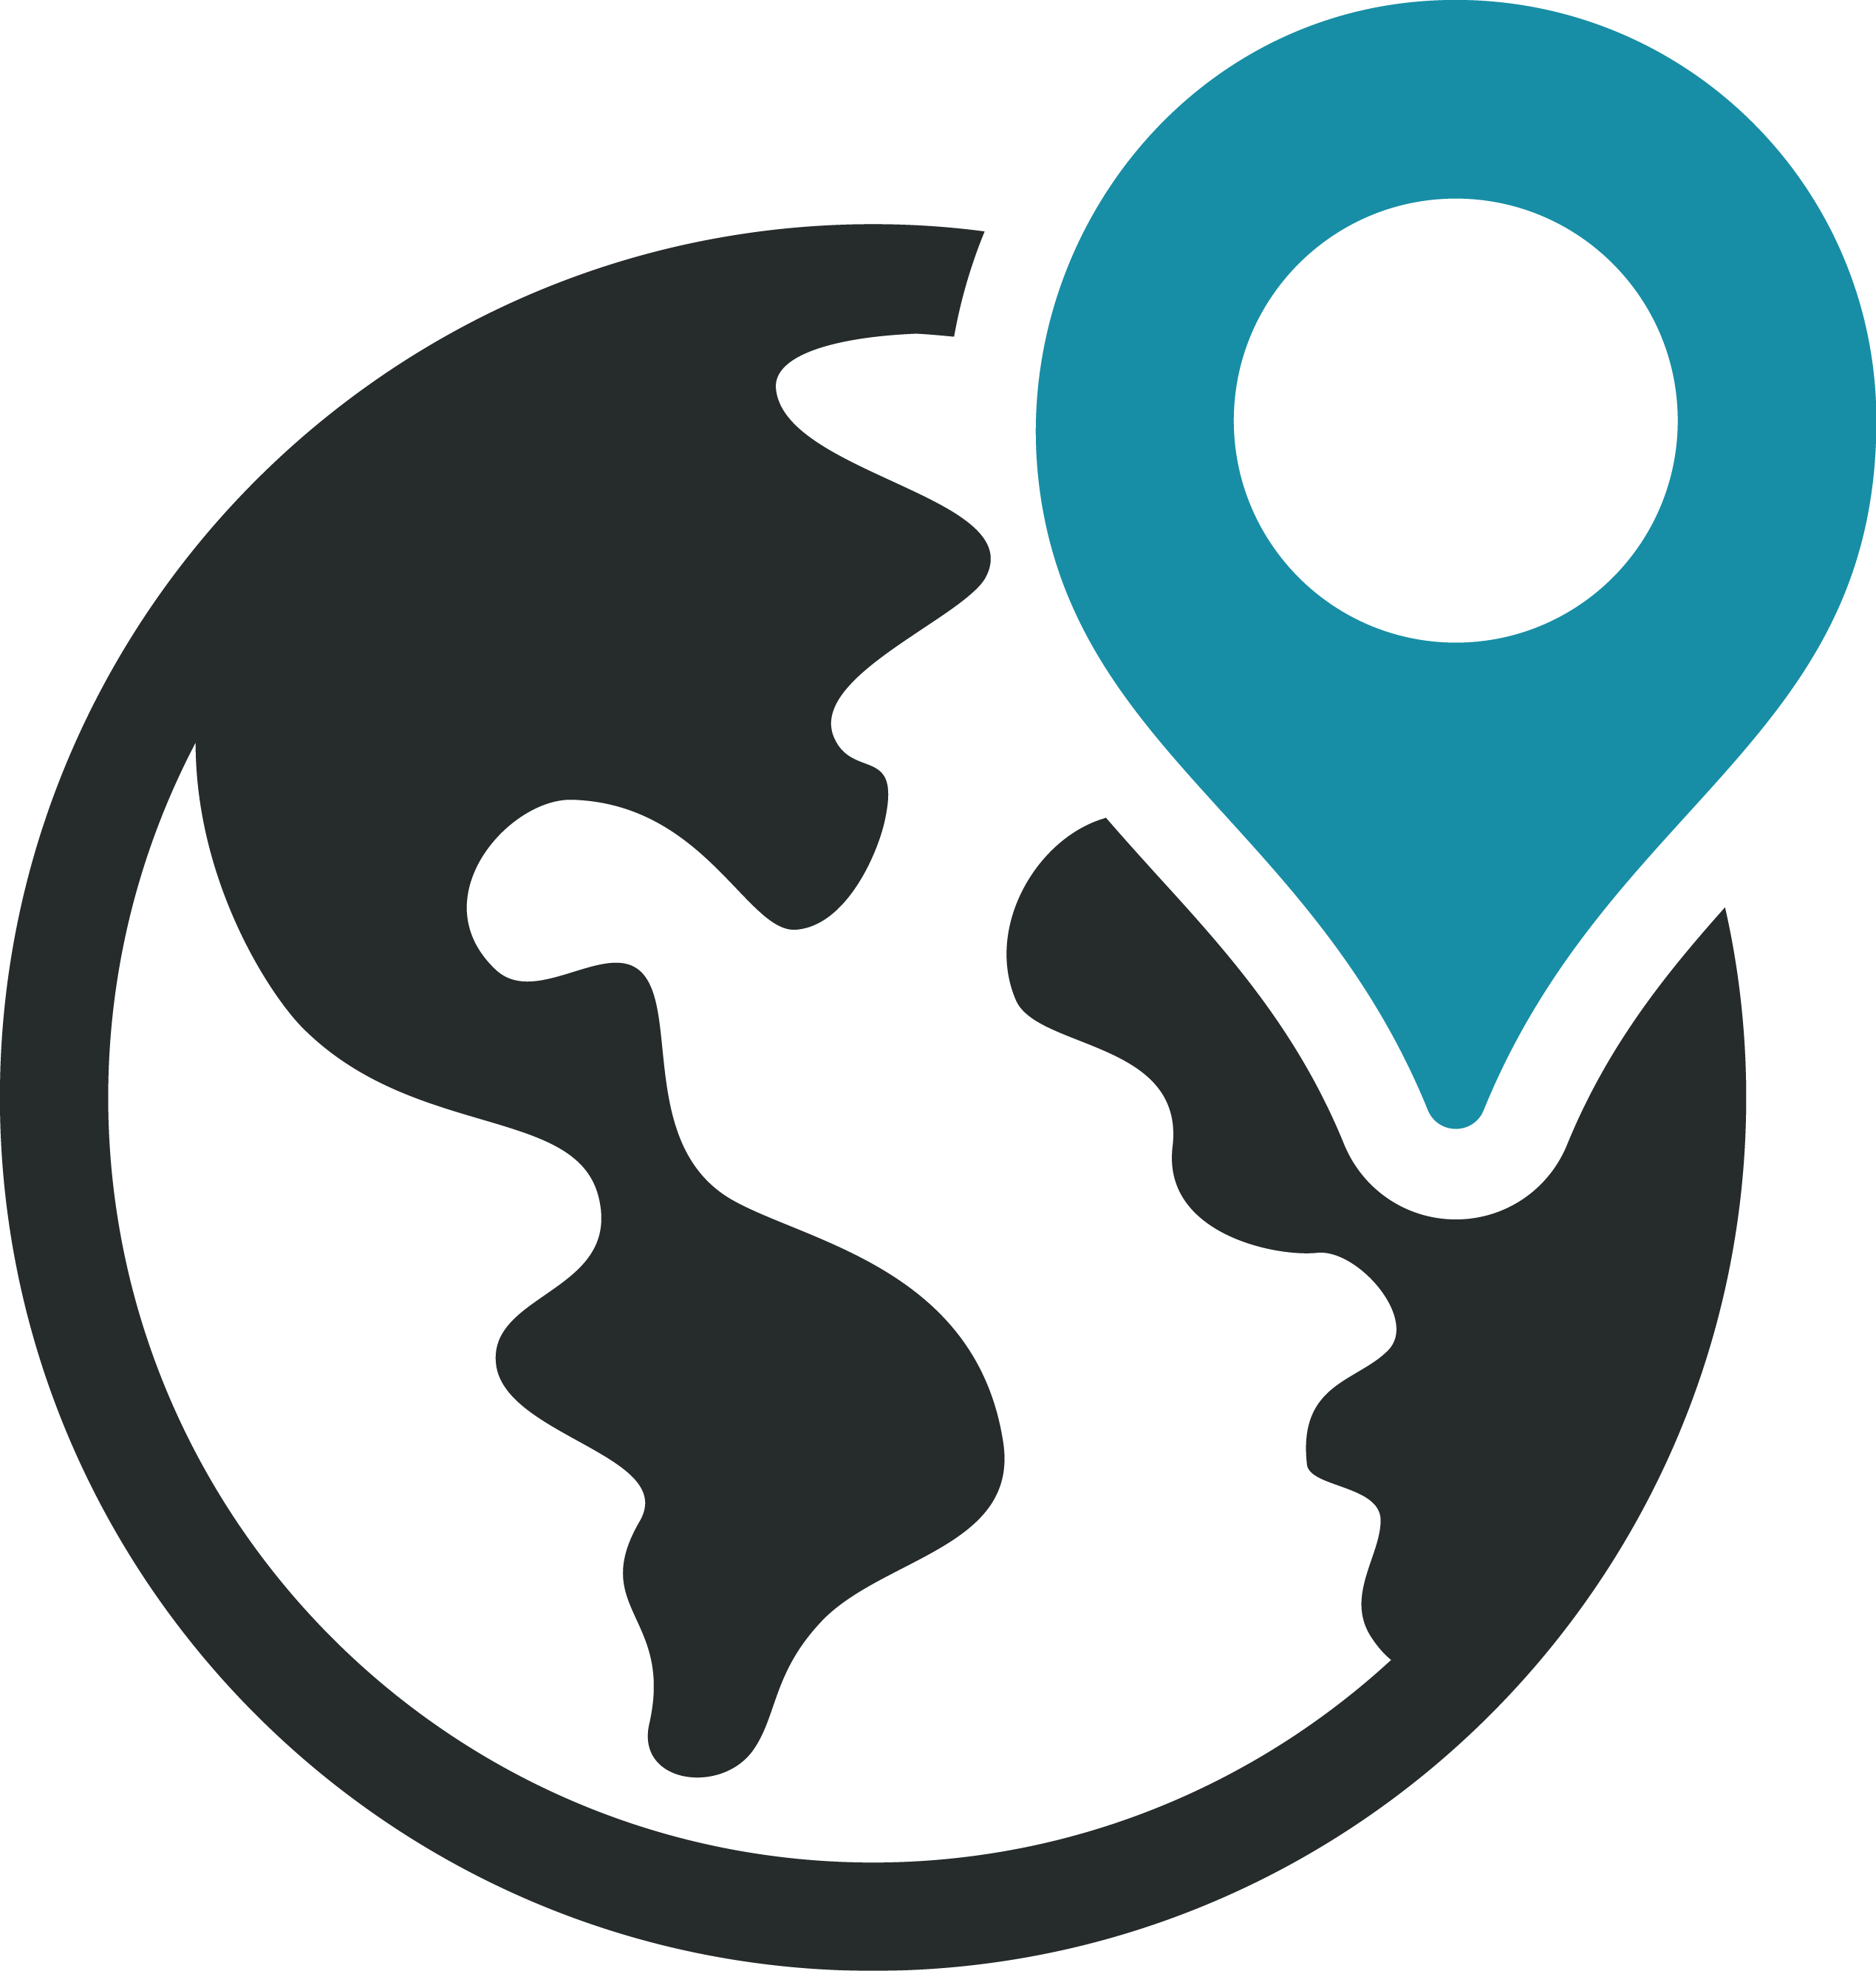 Home » Ee » Sustainability Map - Symbol Of Flight Attendant (2539x2667)